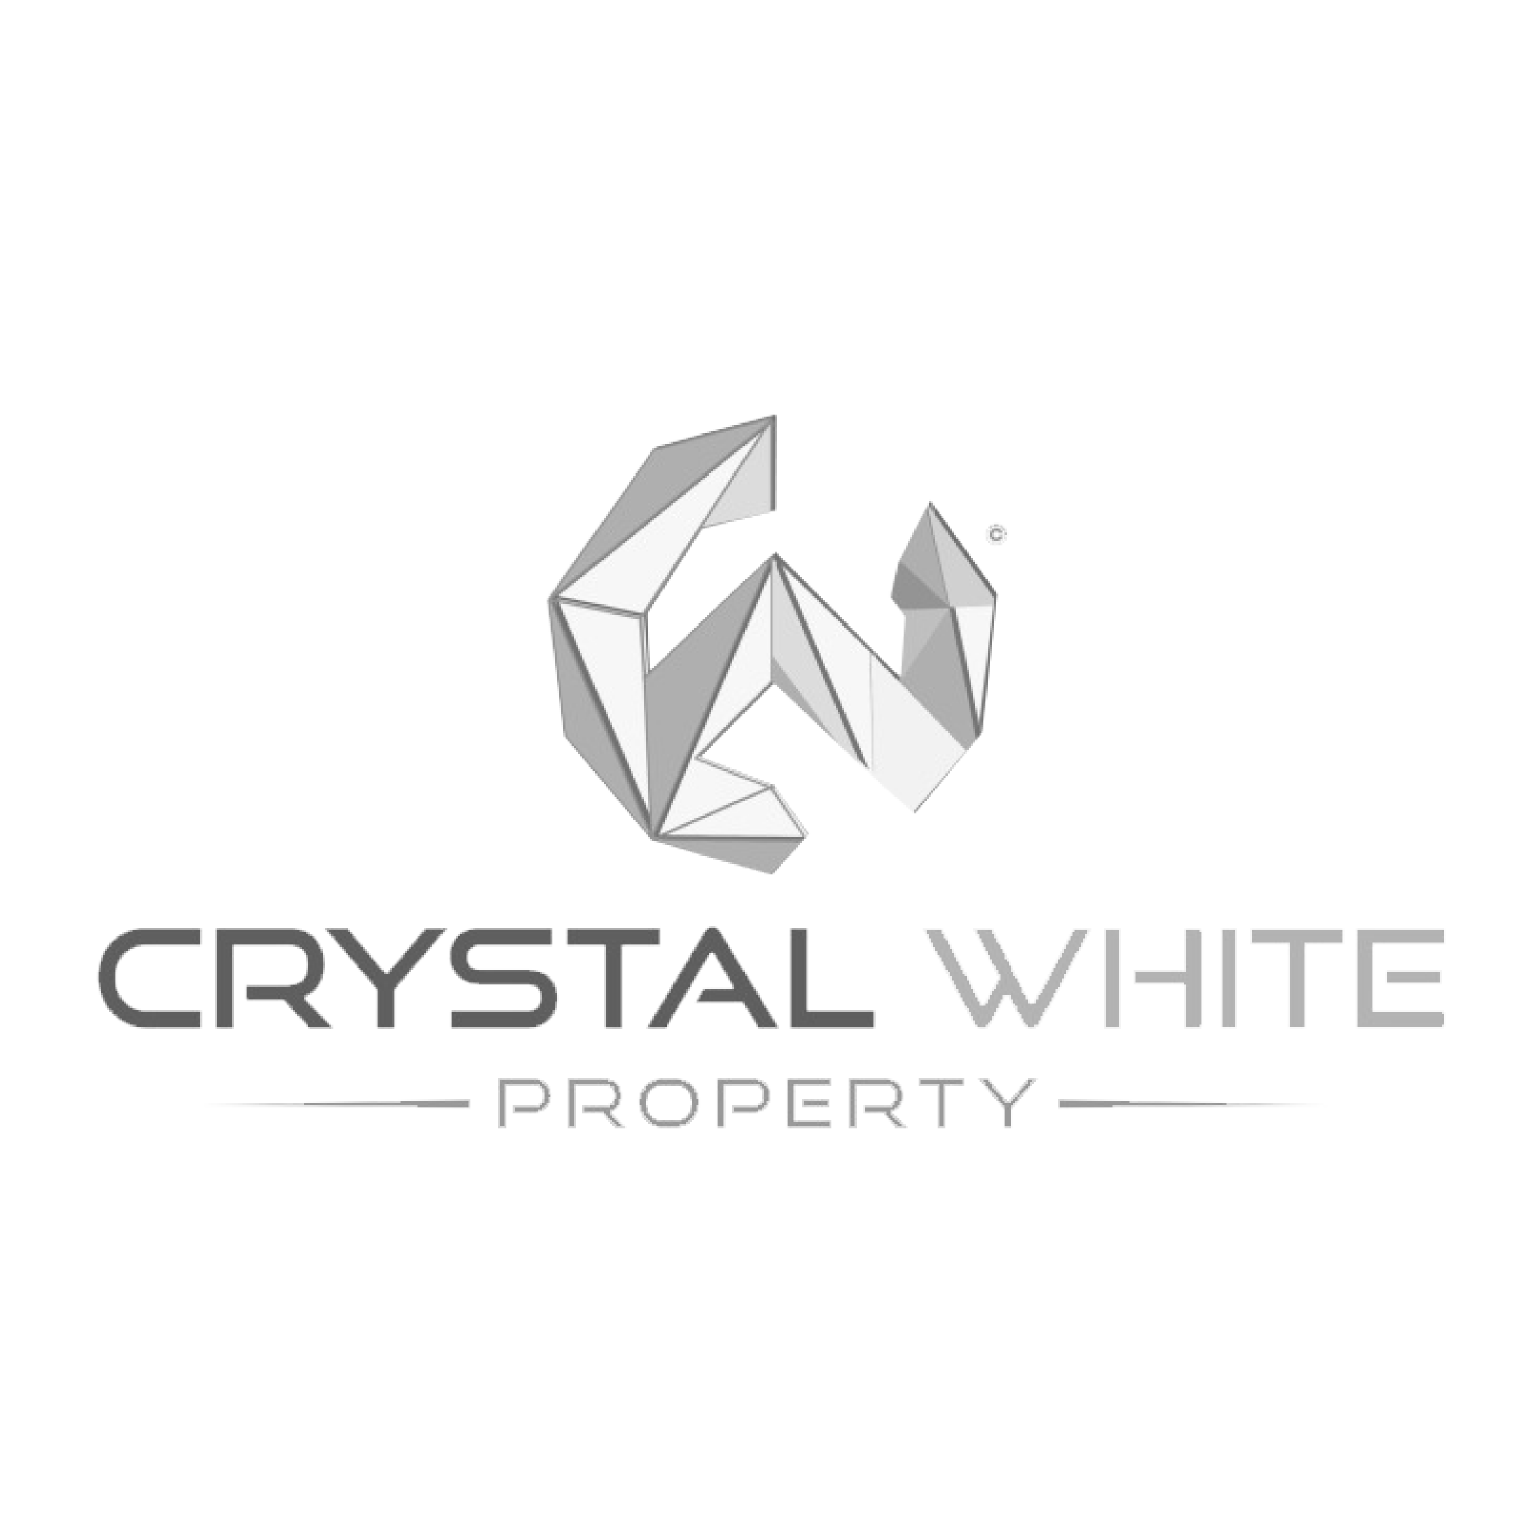 Crystal White Property Limited